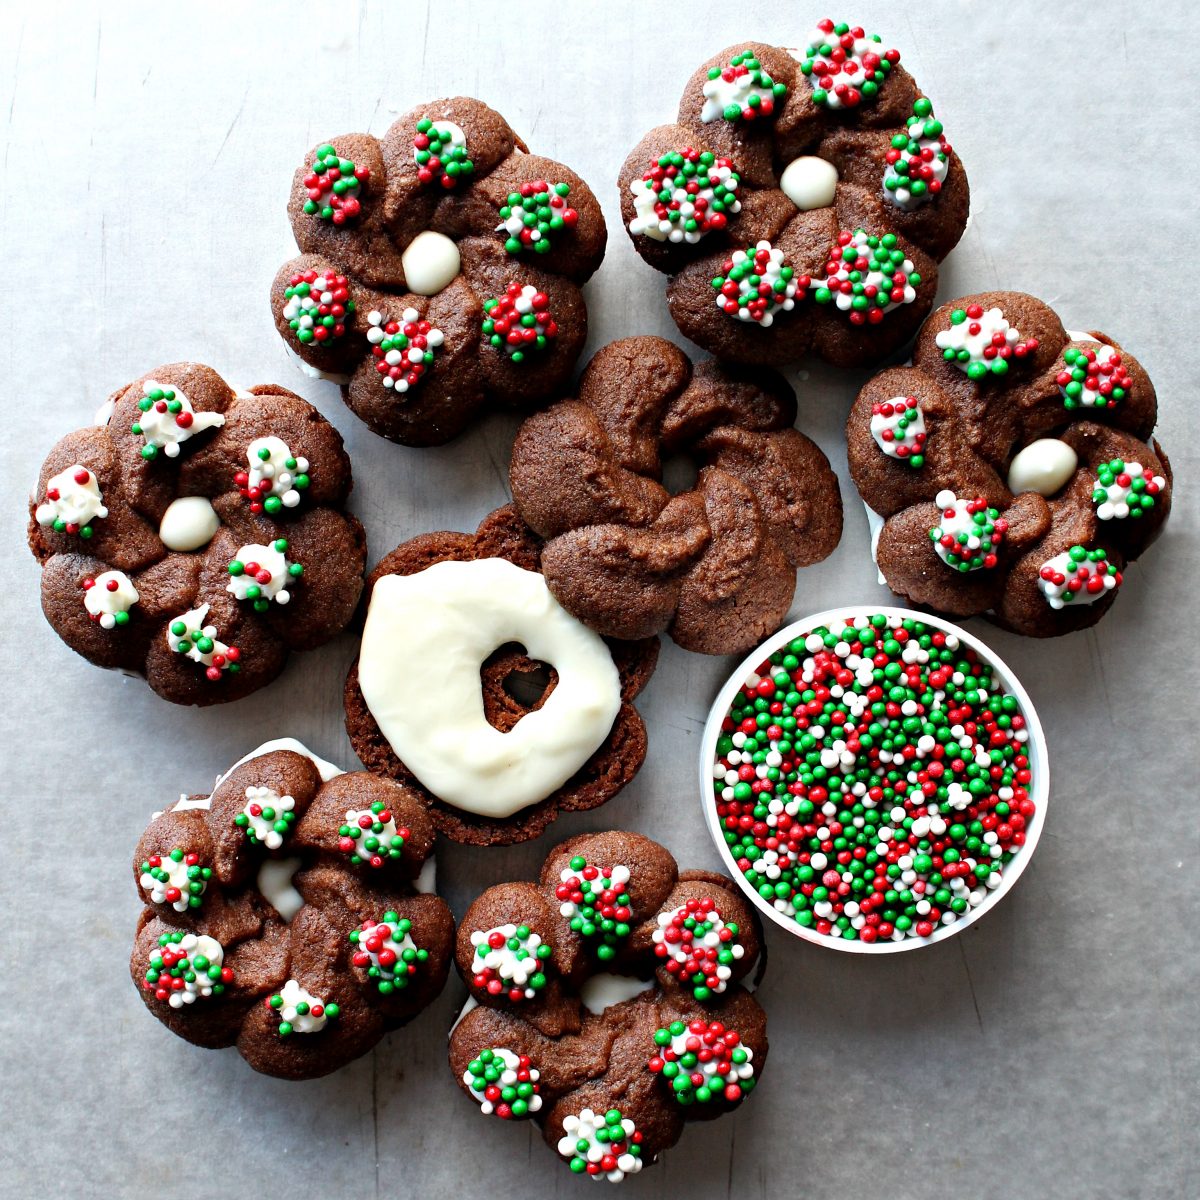 Chocolate Spritz Cookies in wreath shapes, sandwiched with white chocolate, topped with red and green nonpareils.